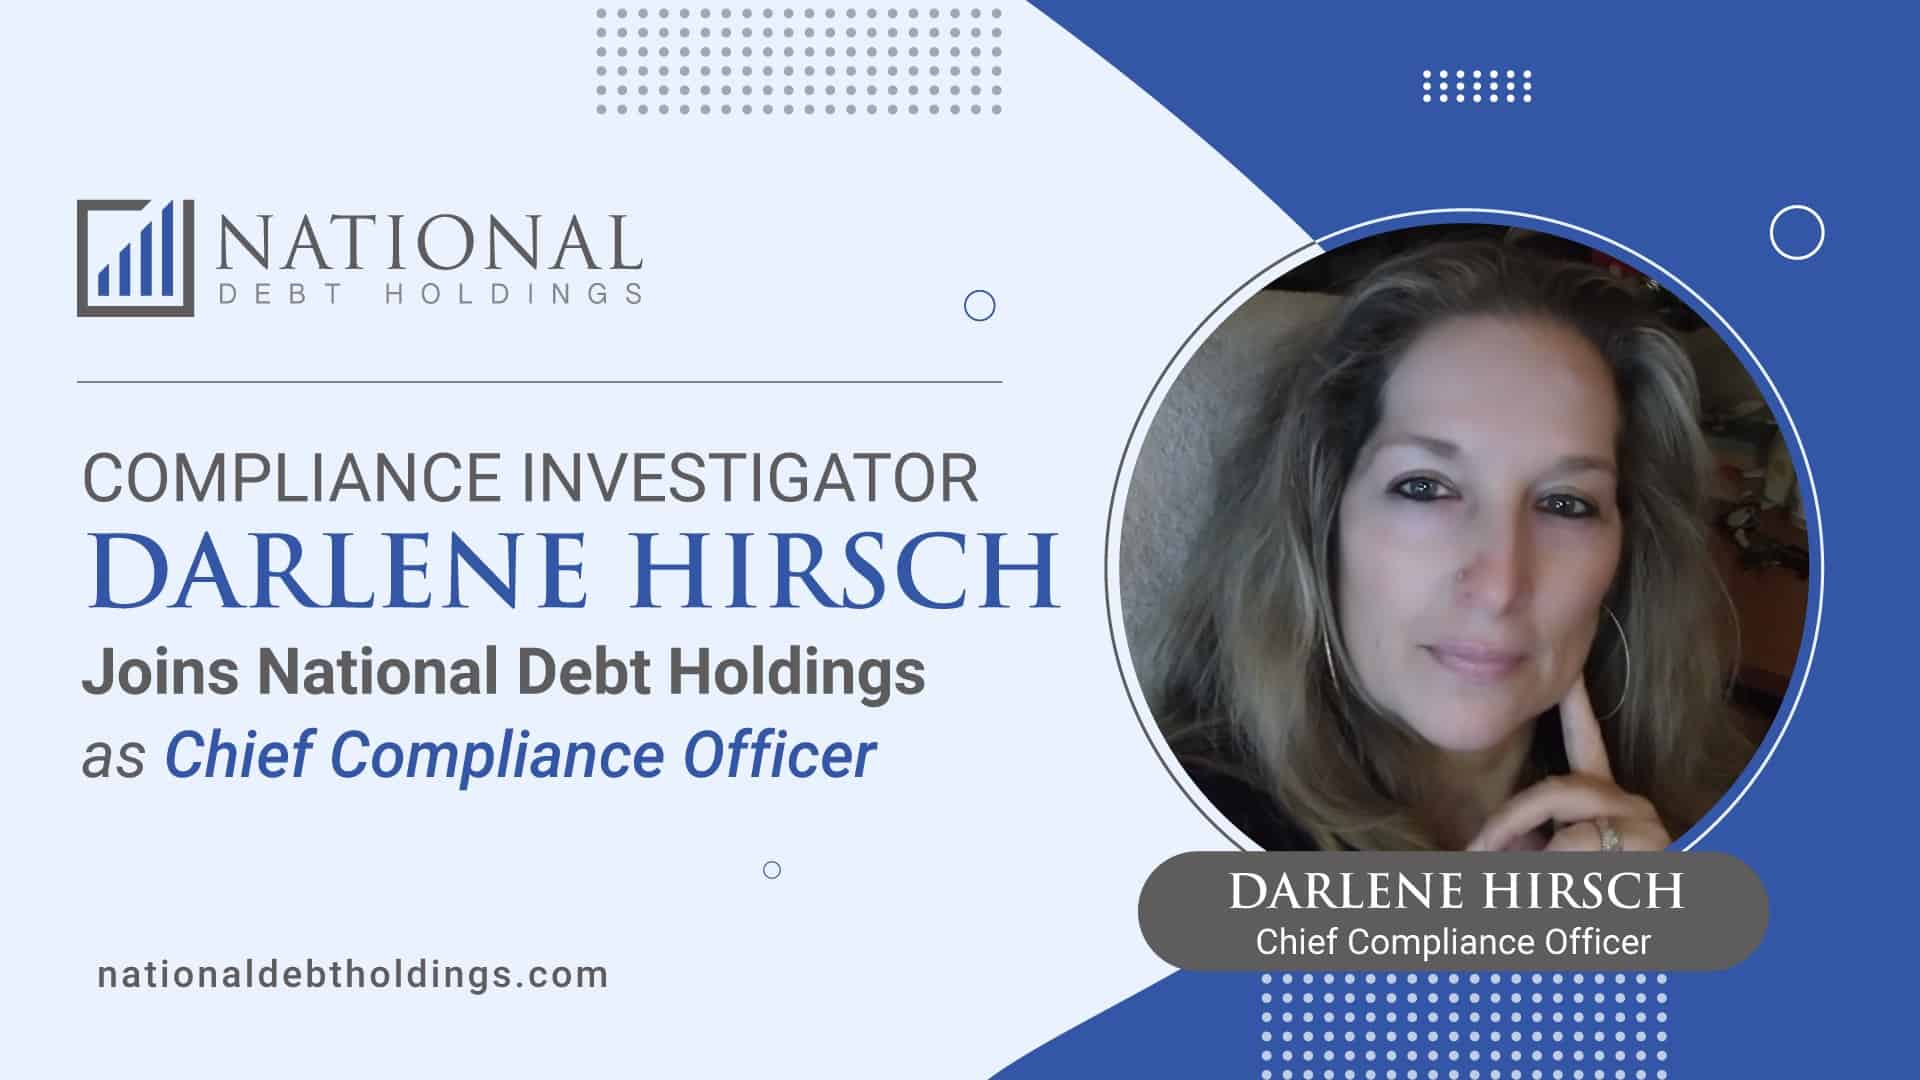 headshot of Darlene Hirsch, Chief Compliance Officer at National Debt Holdings